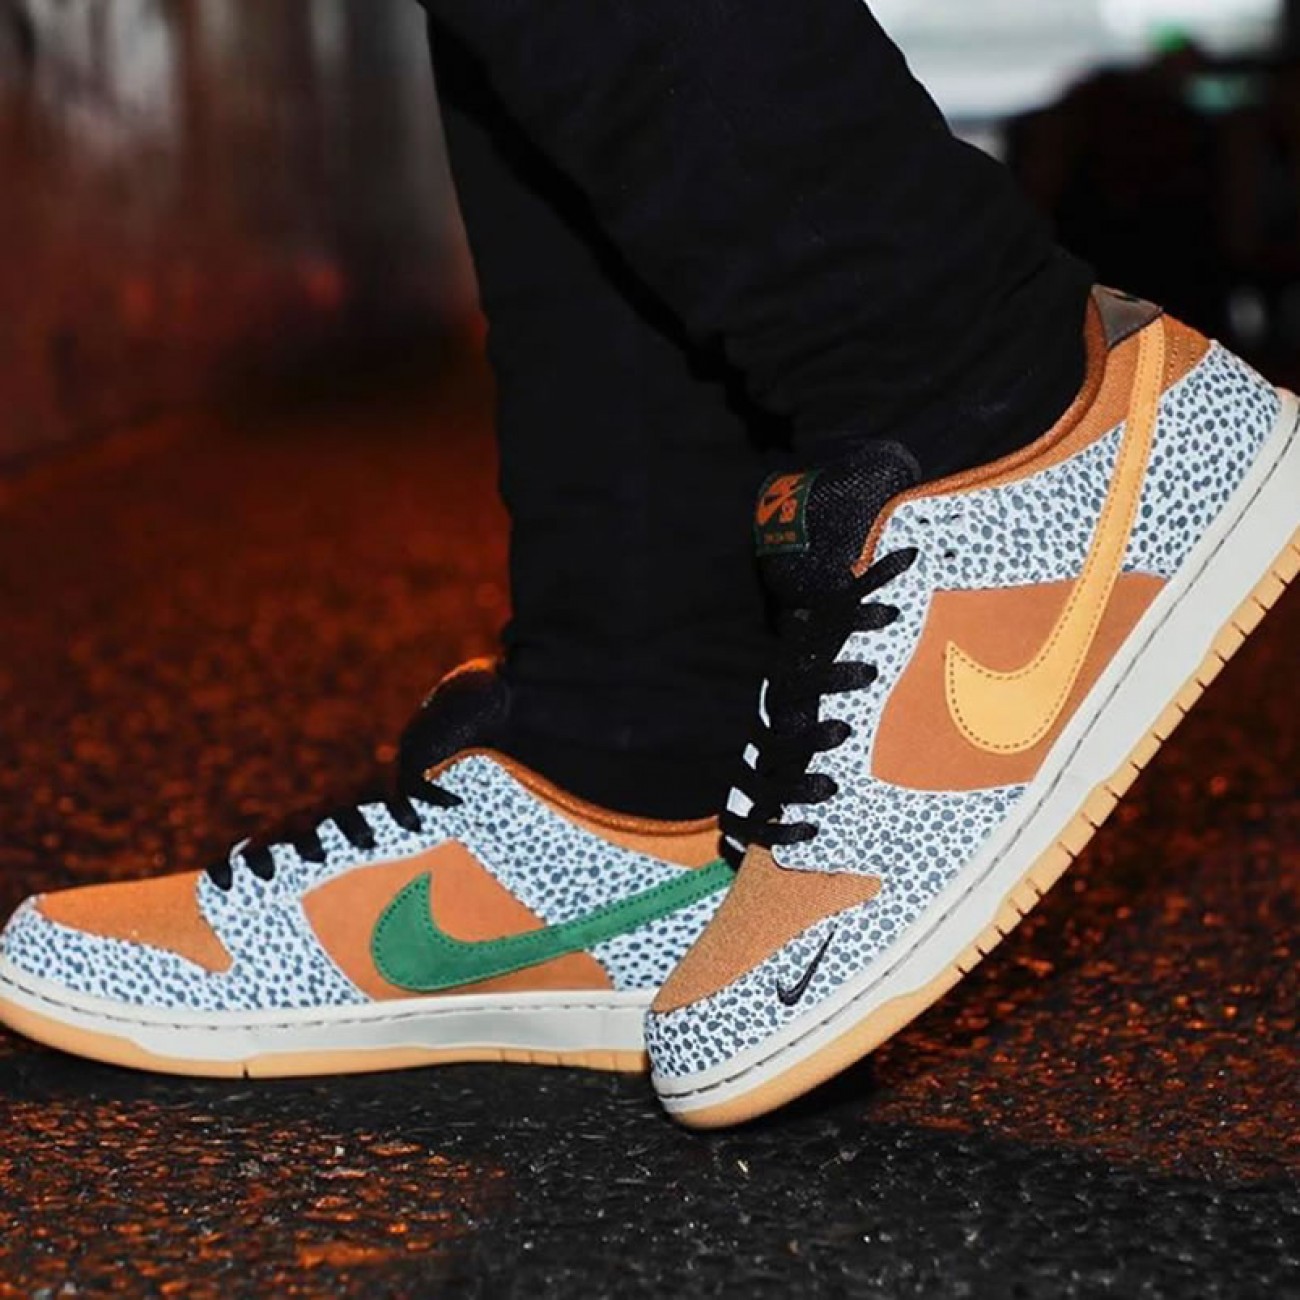 Nike SB Dunk Low "Safari" Outfit For Sale Release Date CD2563-002